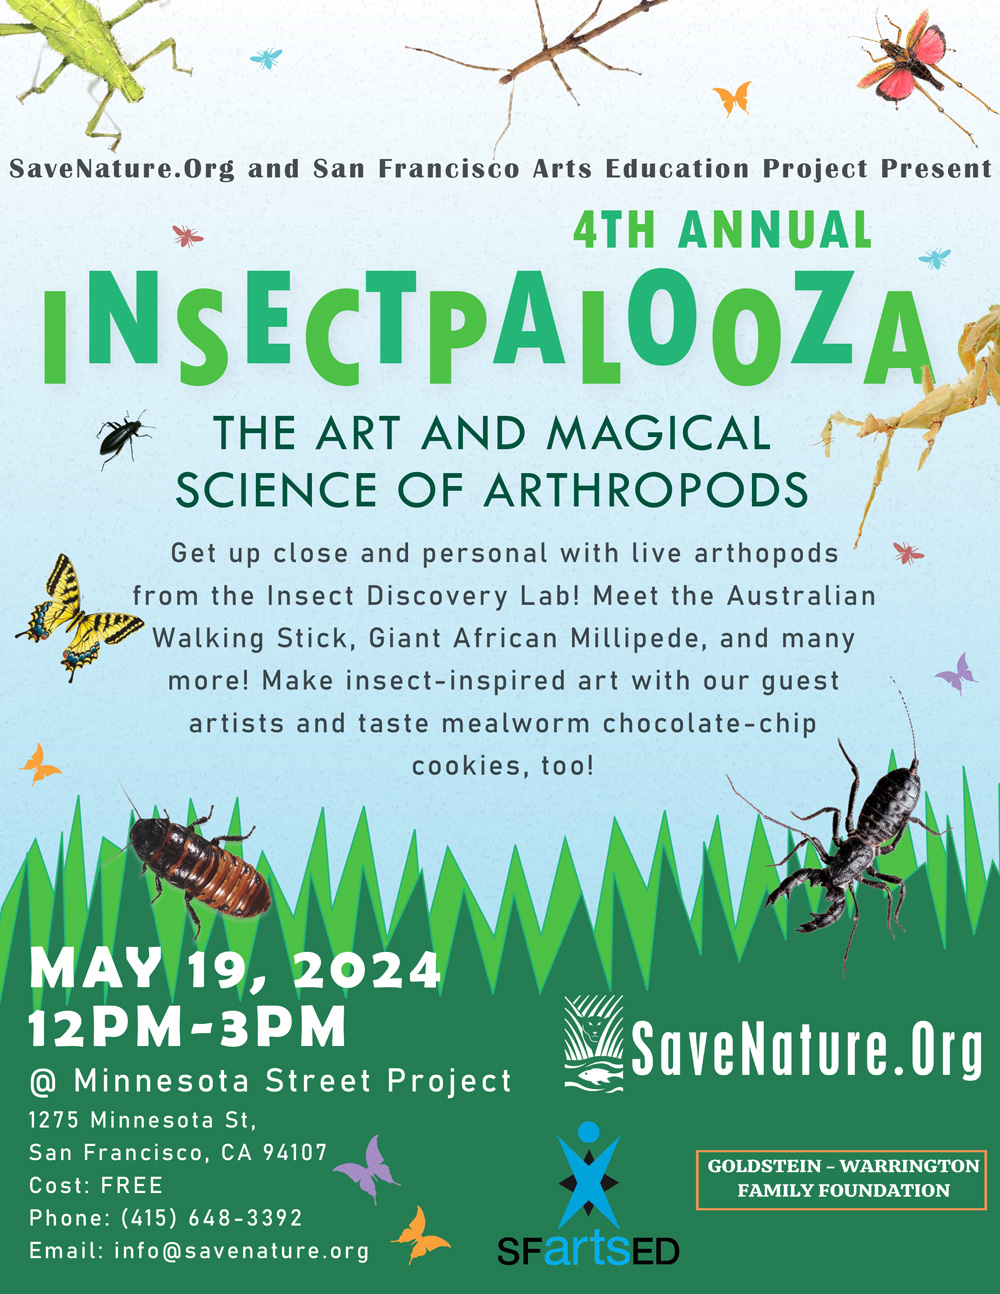 InsectPalooza - The Art and Magical Science of Arthropods